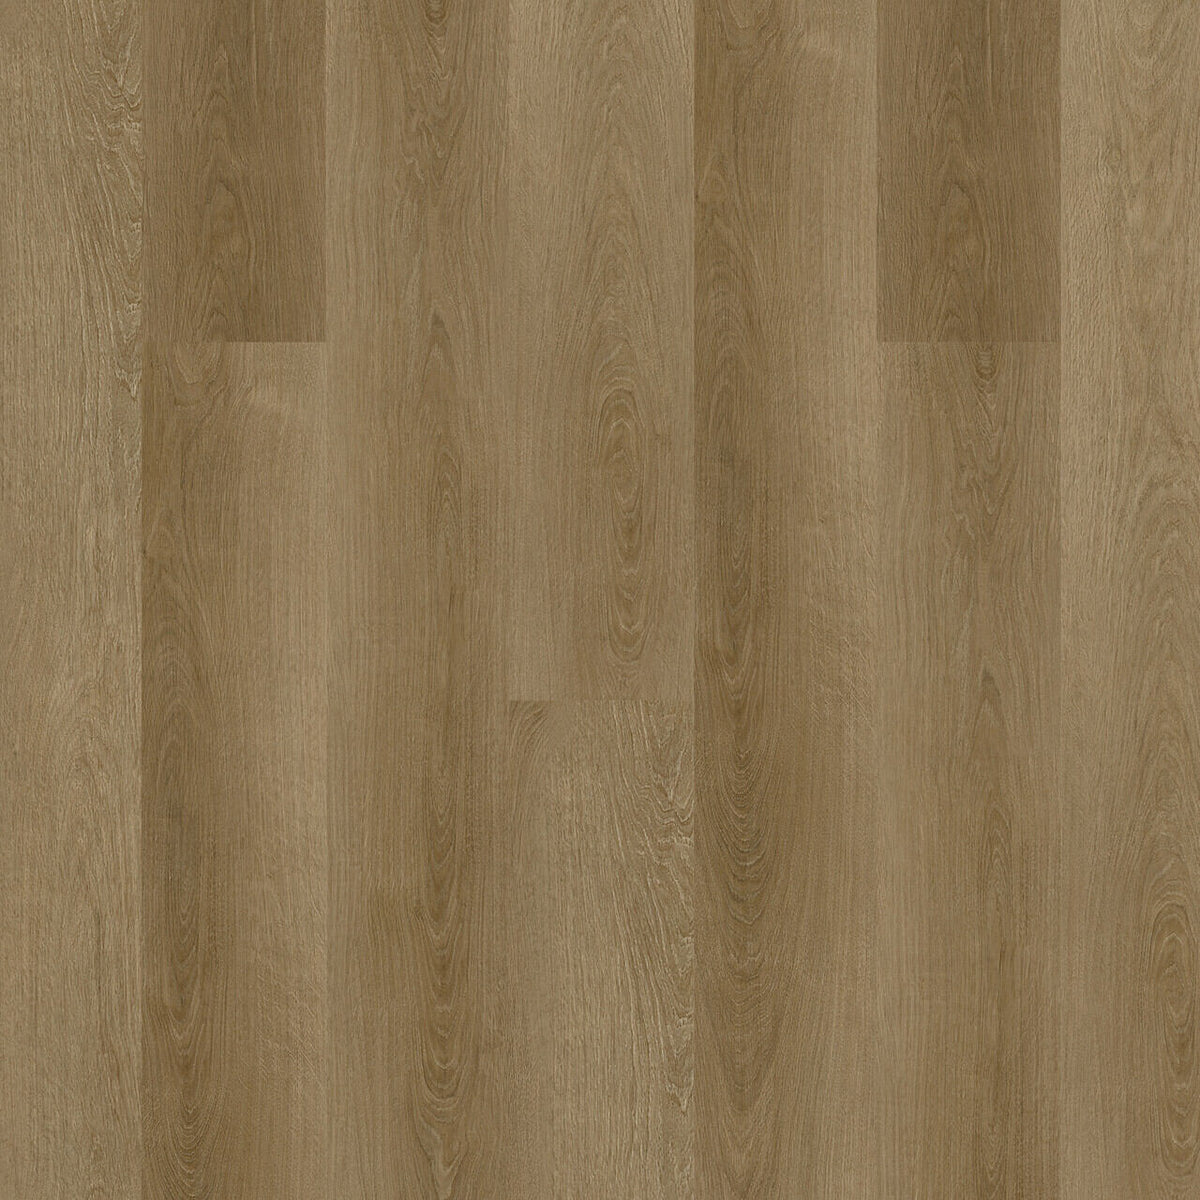 Engineered Floors - Triumph Collection - New Standard Plus - 7 in. x 48 in. - Coral Coast